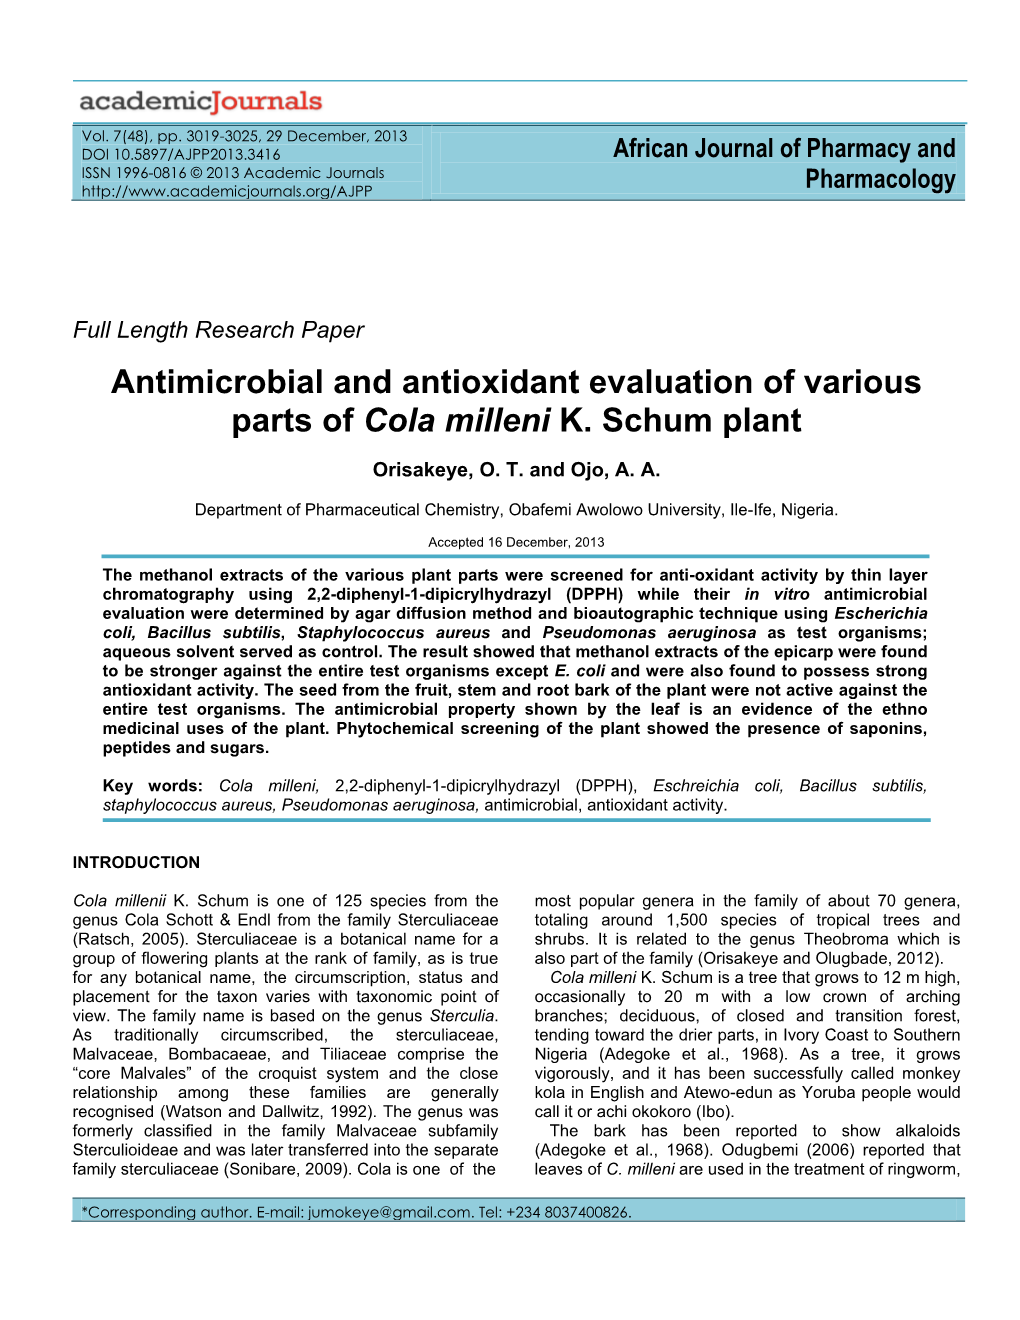 Antimicrobial and Antioxidant Evaluation of Various Parts of Cola Milleni K